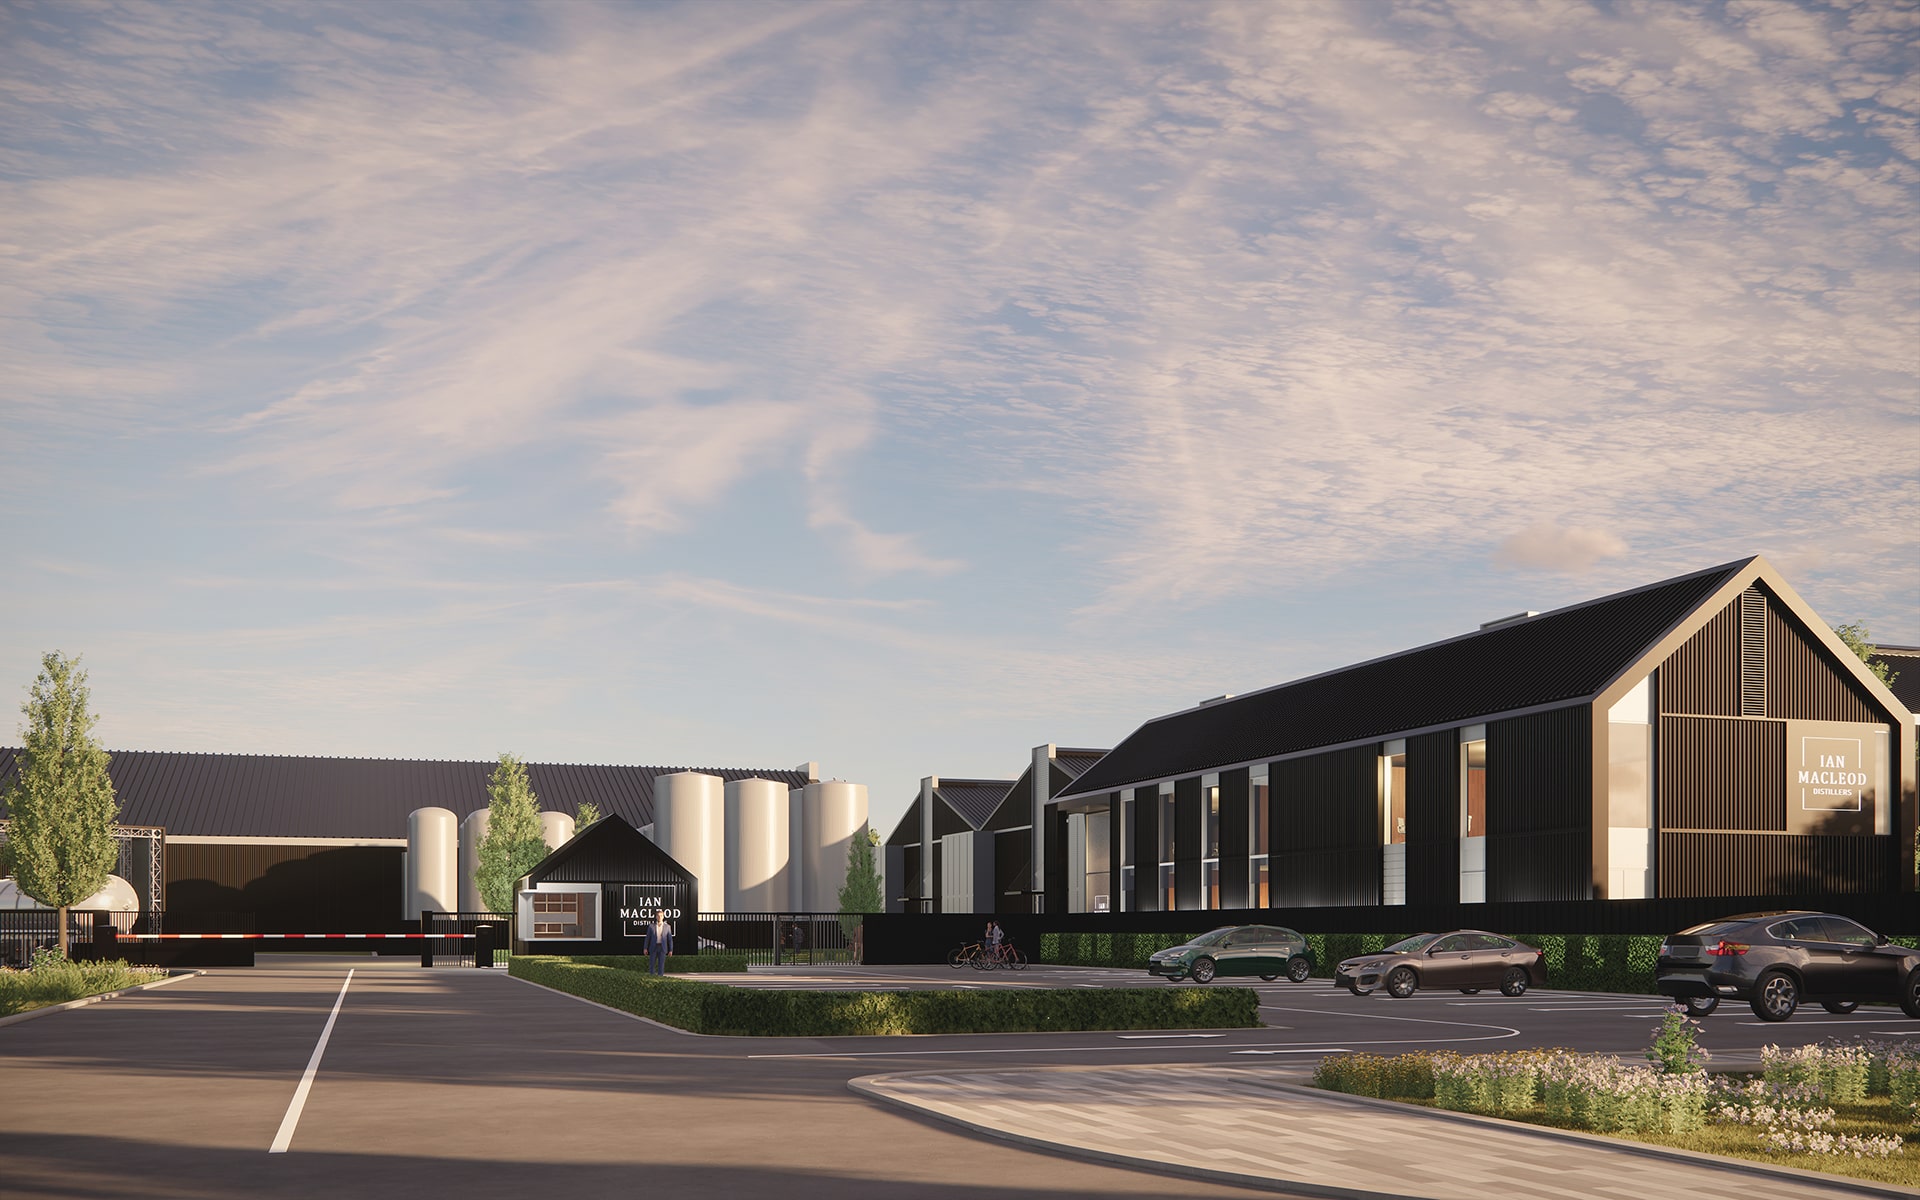 Throsk whisky storage facility gets green light